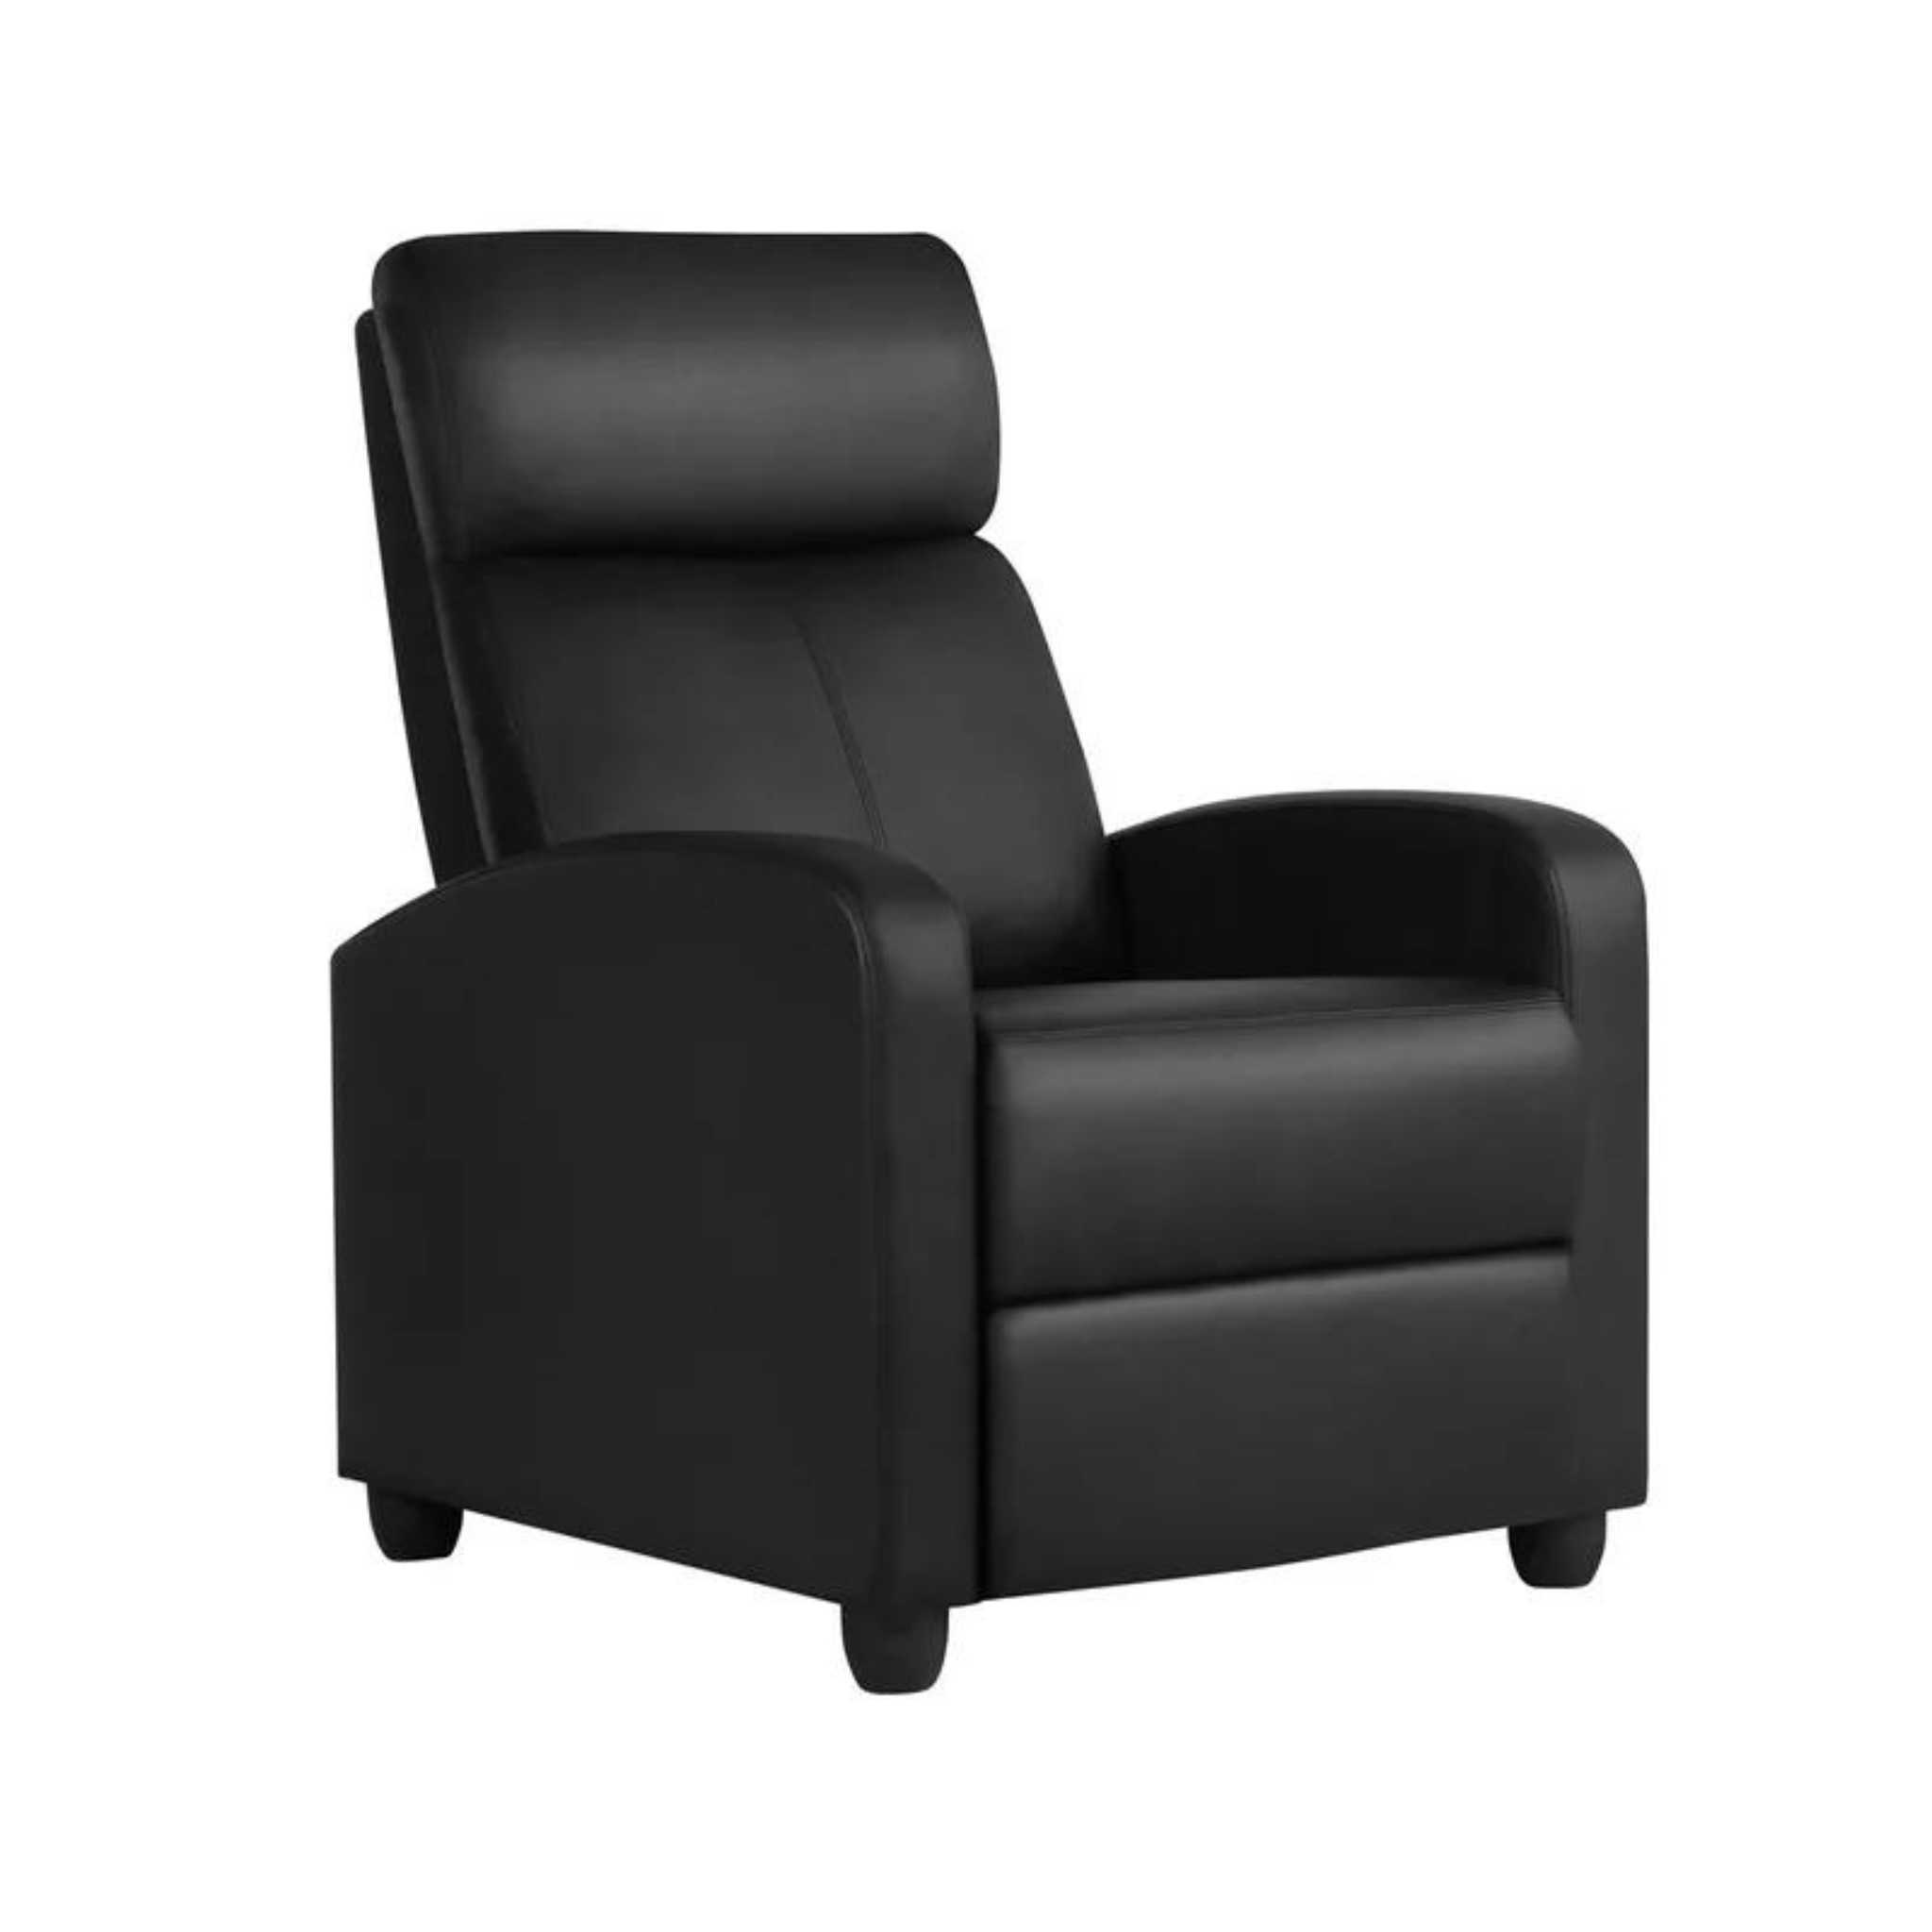 Alden Design Faux Leather Push Back Theater Recliner Chair